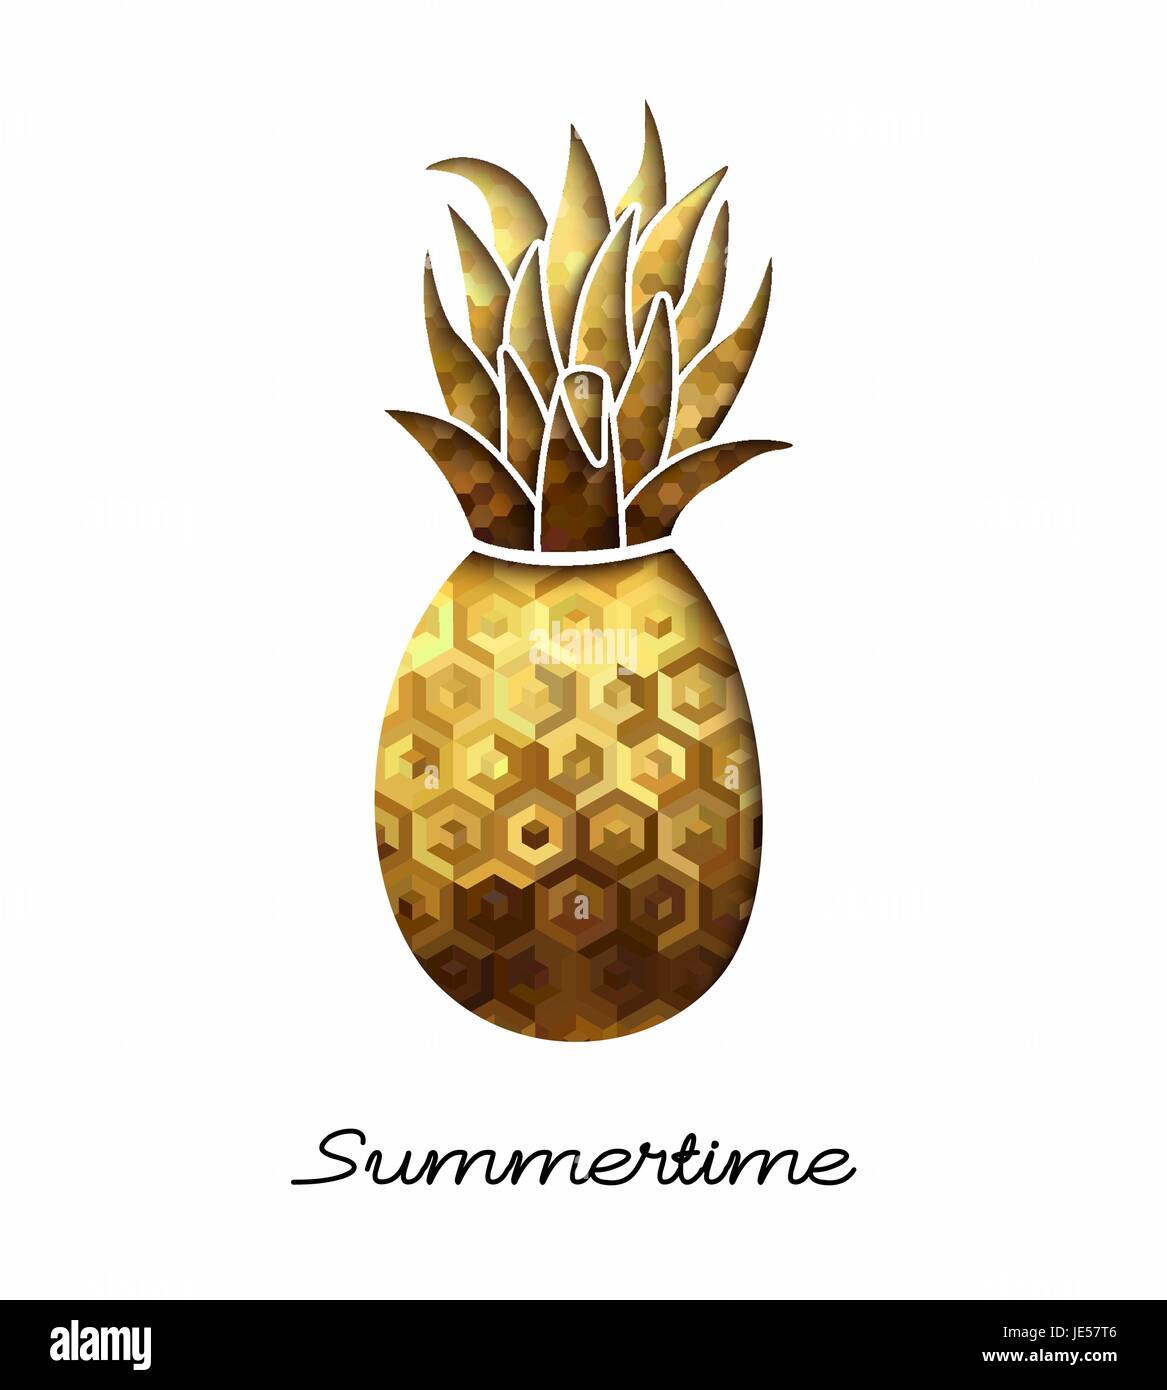 Summer time season tropical design, gold pineapple illustration in paper cut style with luxury texture. EPS10 vector. Stock Vector